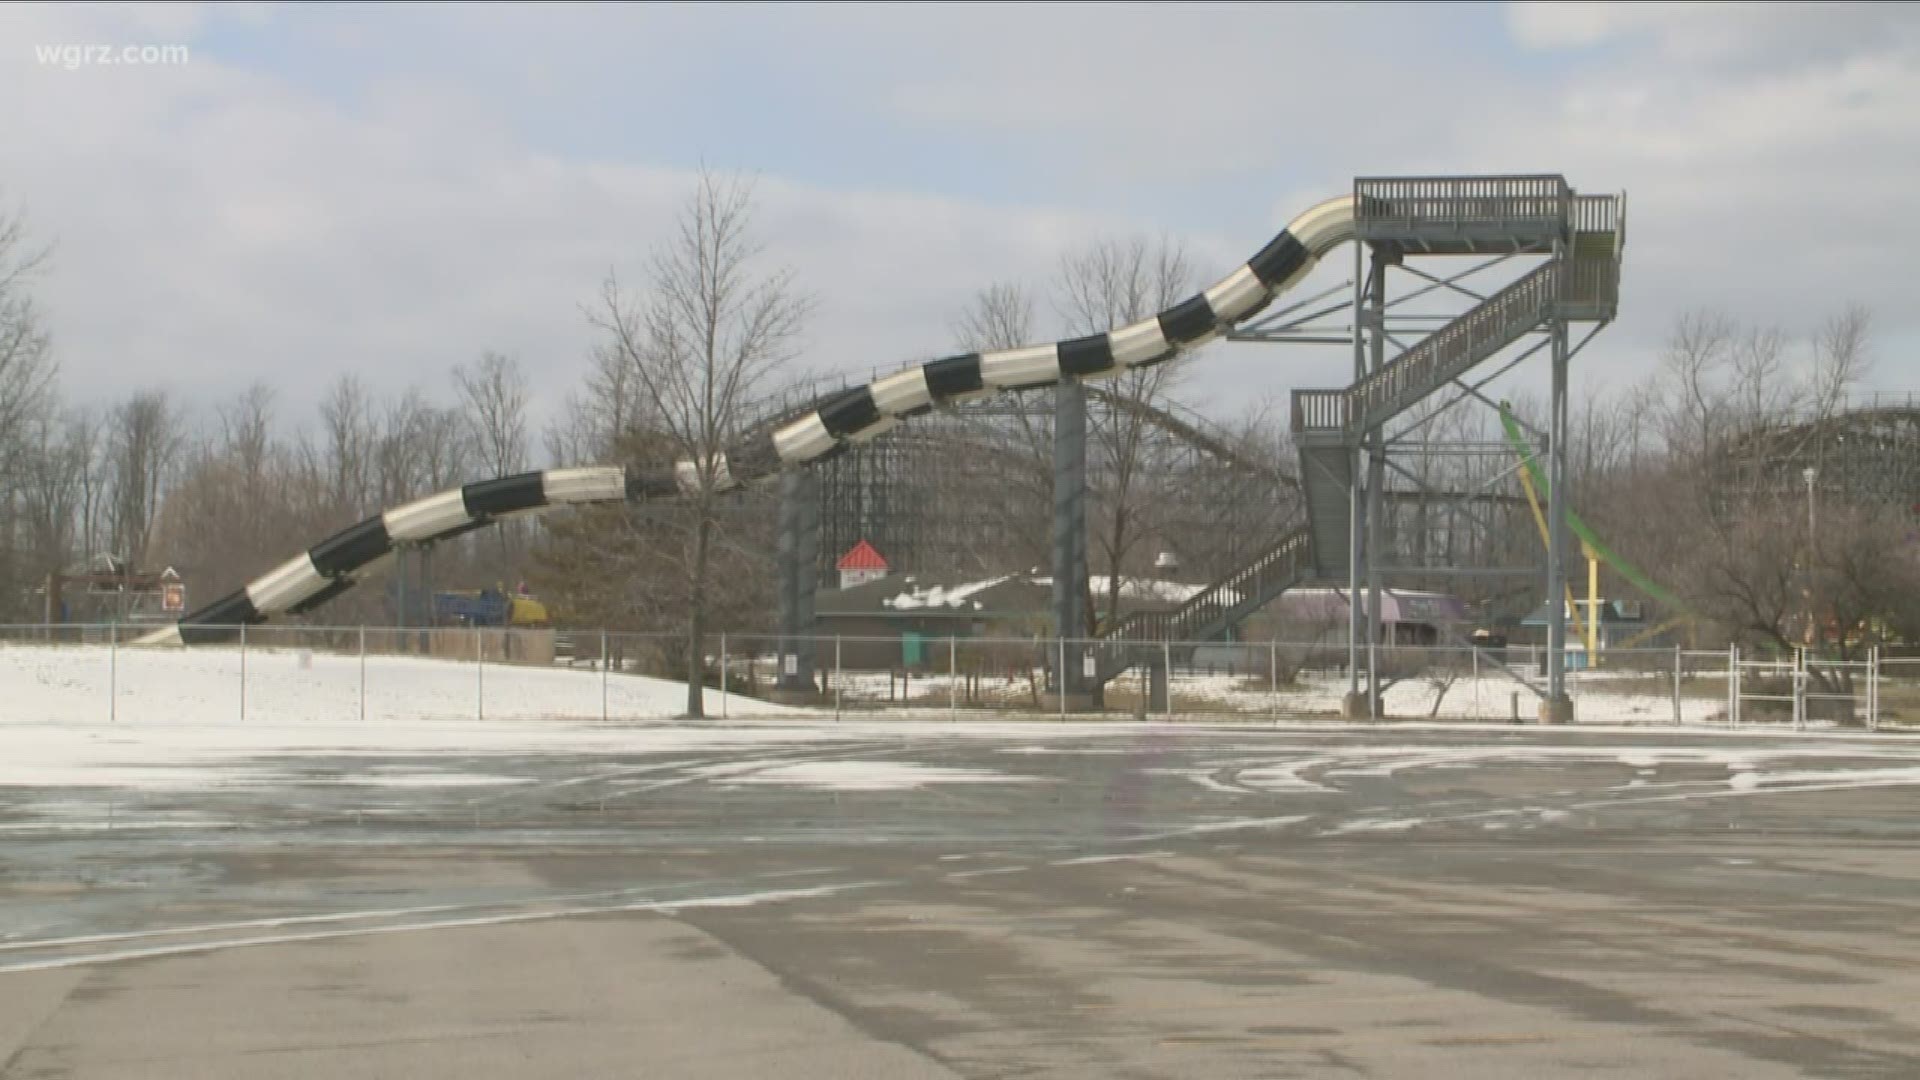 If you're one of those folks looking for a refund on a pass to the now closed Fantasy Island Amusement Park, there's some good news from state officials.